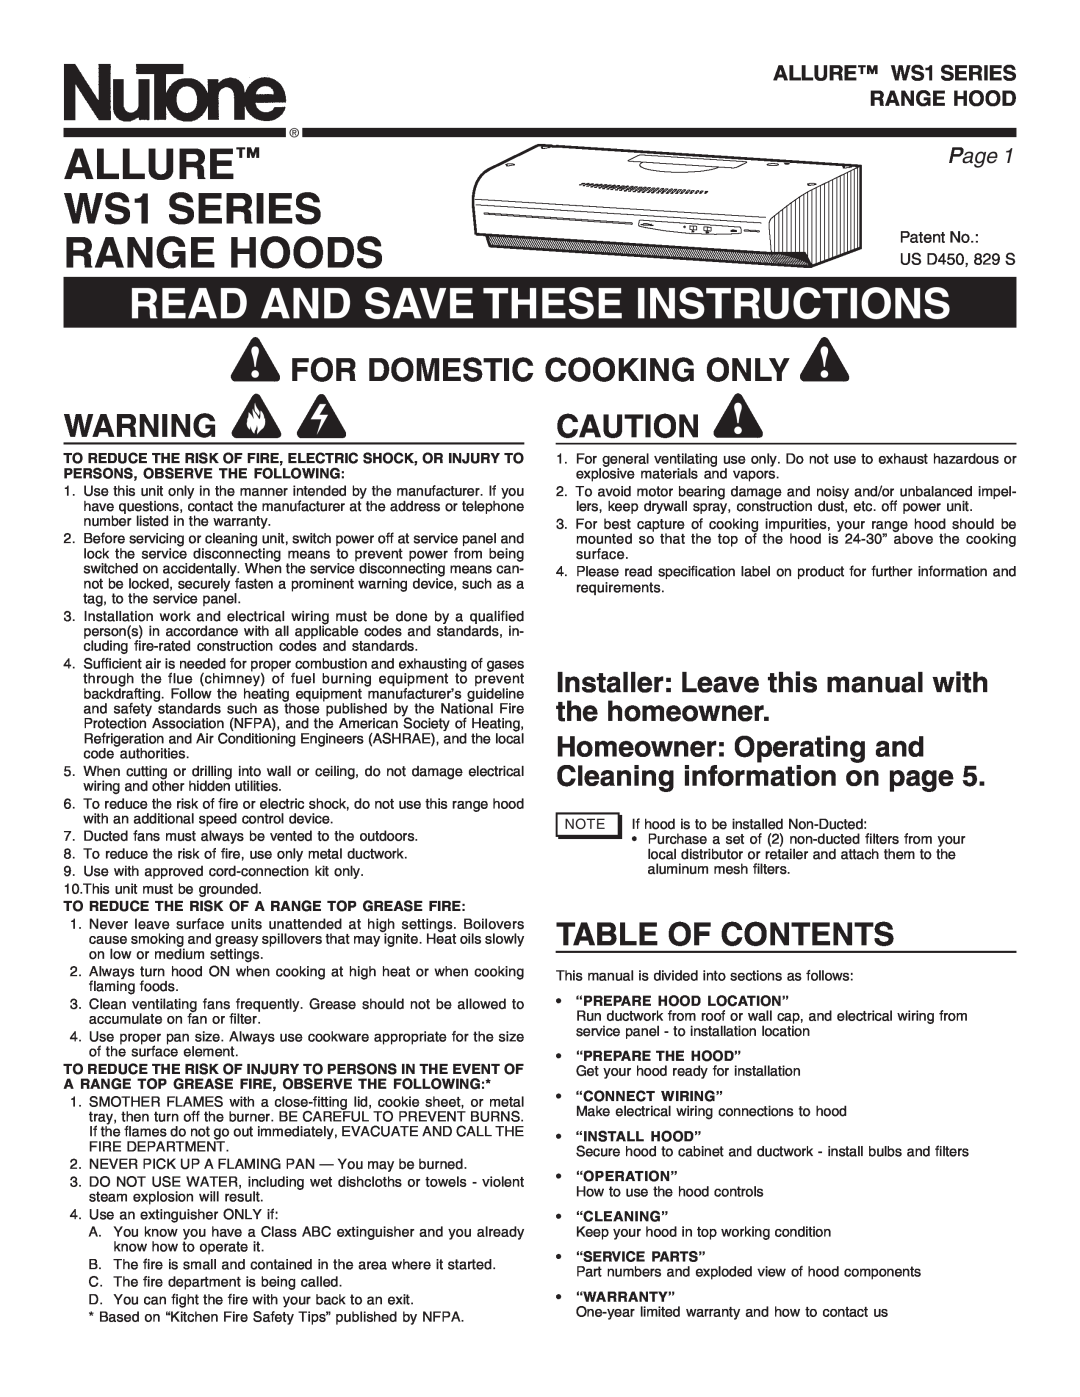 NuTone warranty ALLURE WS1 SERIES RANGE HOODS, Read And Save These Instructions, For Domestic Cooking Only, Page 